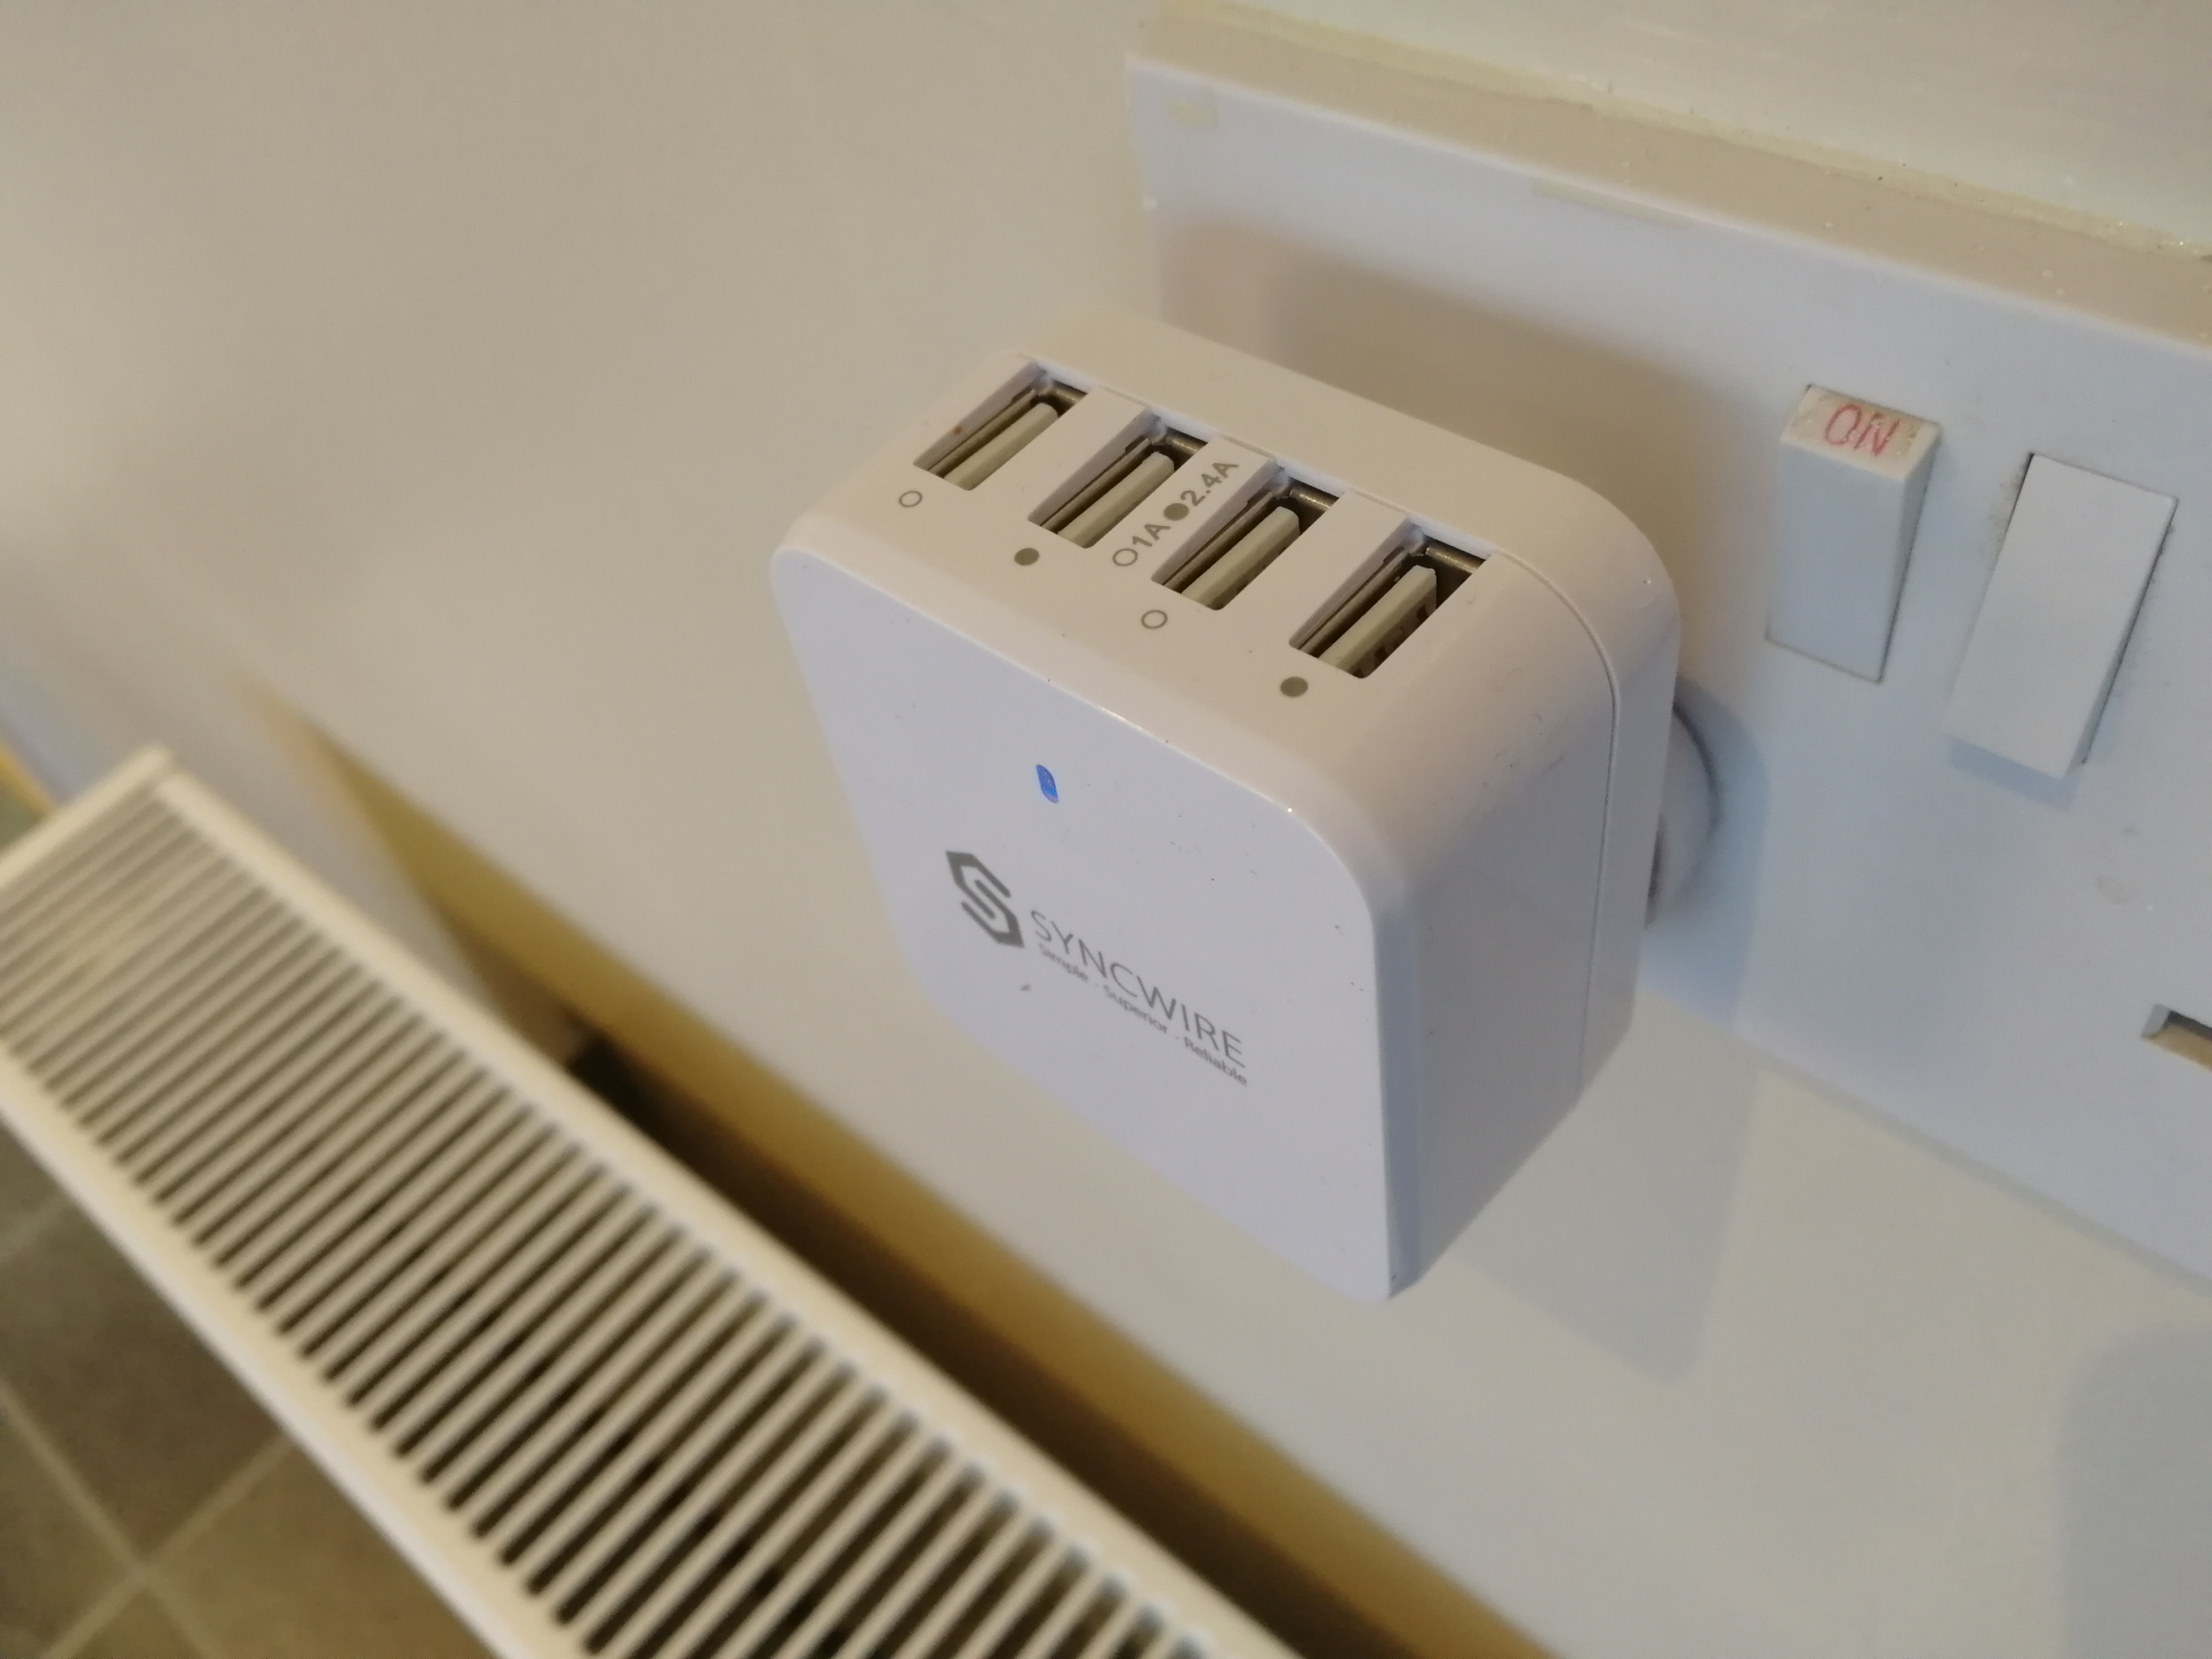 REVIEWED: Syncwire 4-Port USB Wall Charger 